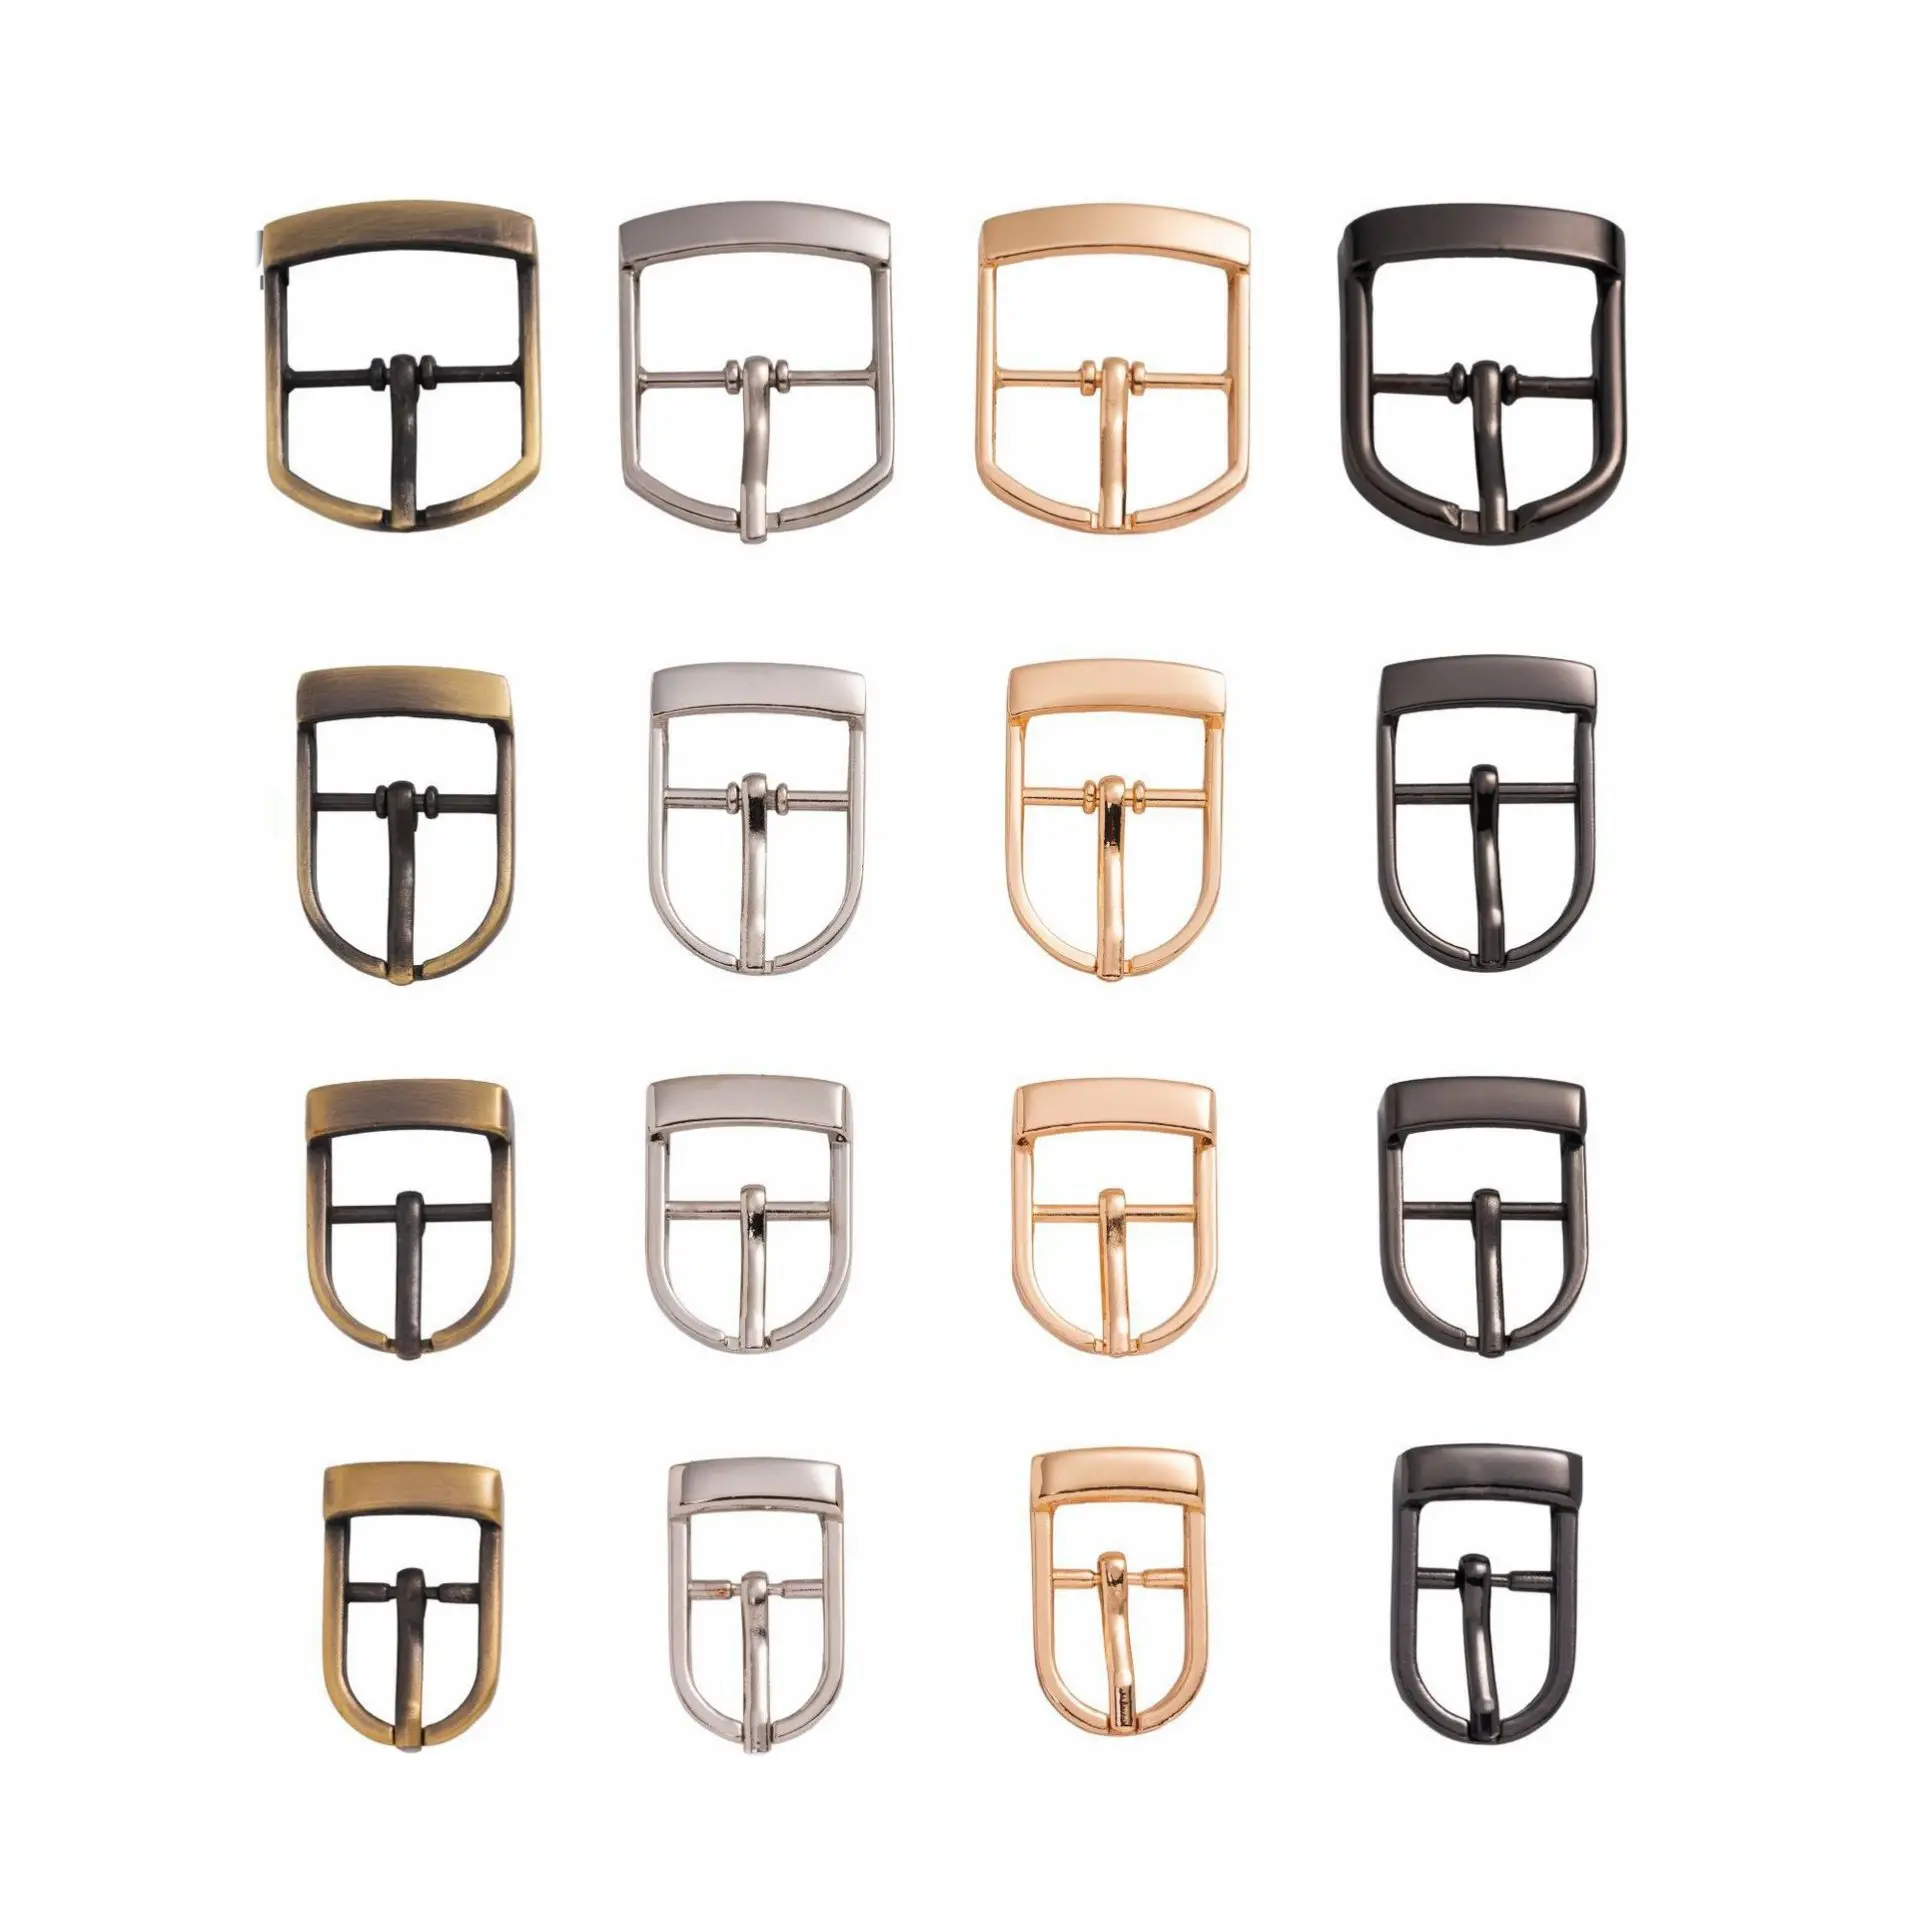 

5Pcs 12/15/20/25mm Metal Pin Belt Buckles Adjuster Bags Strap Slider Shoes Clasps DIY Leather Hardware Accessories